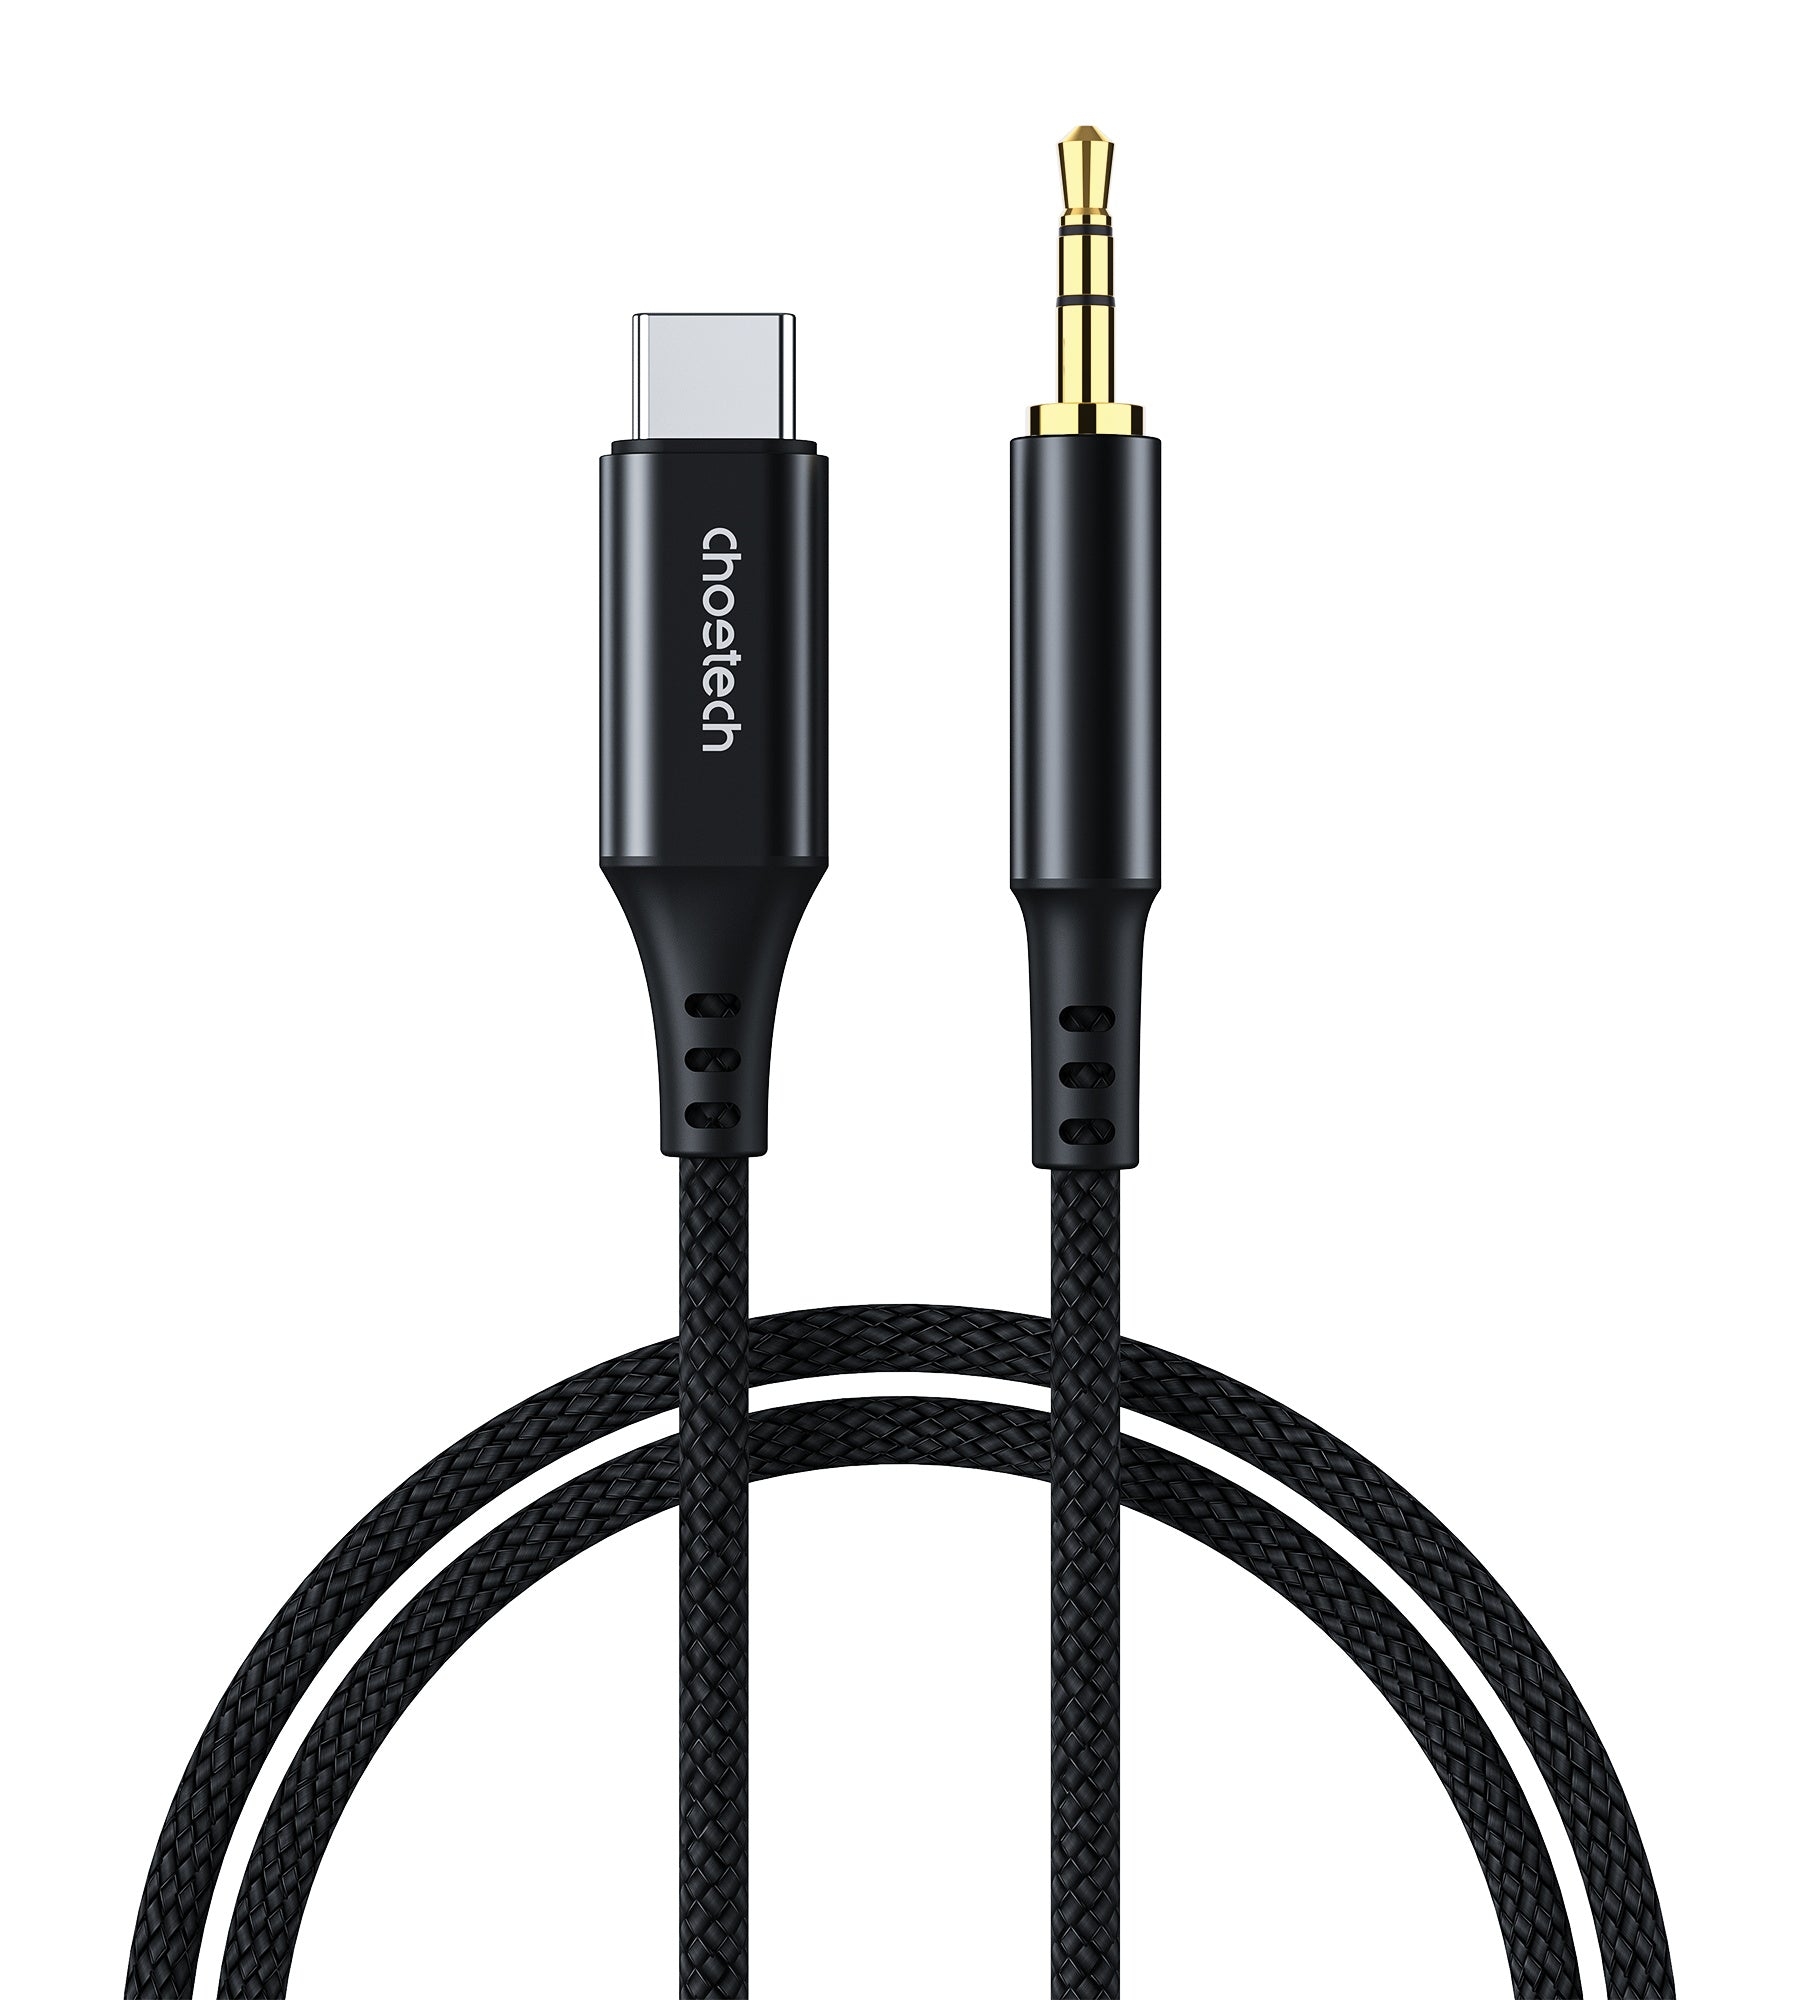 AUX008 Type-C To 3.5mm Audio Cable 2M